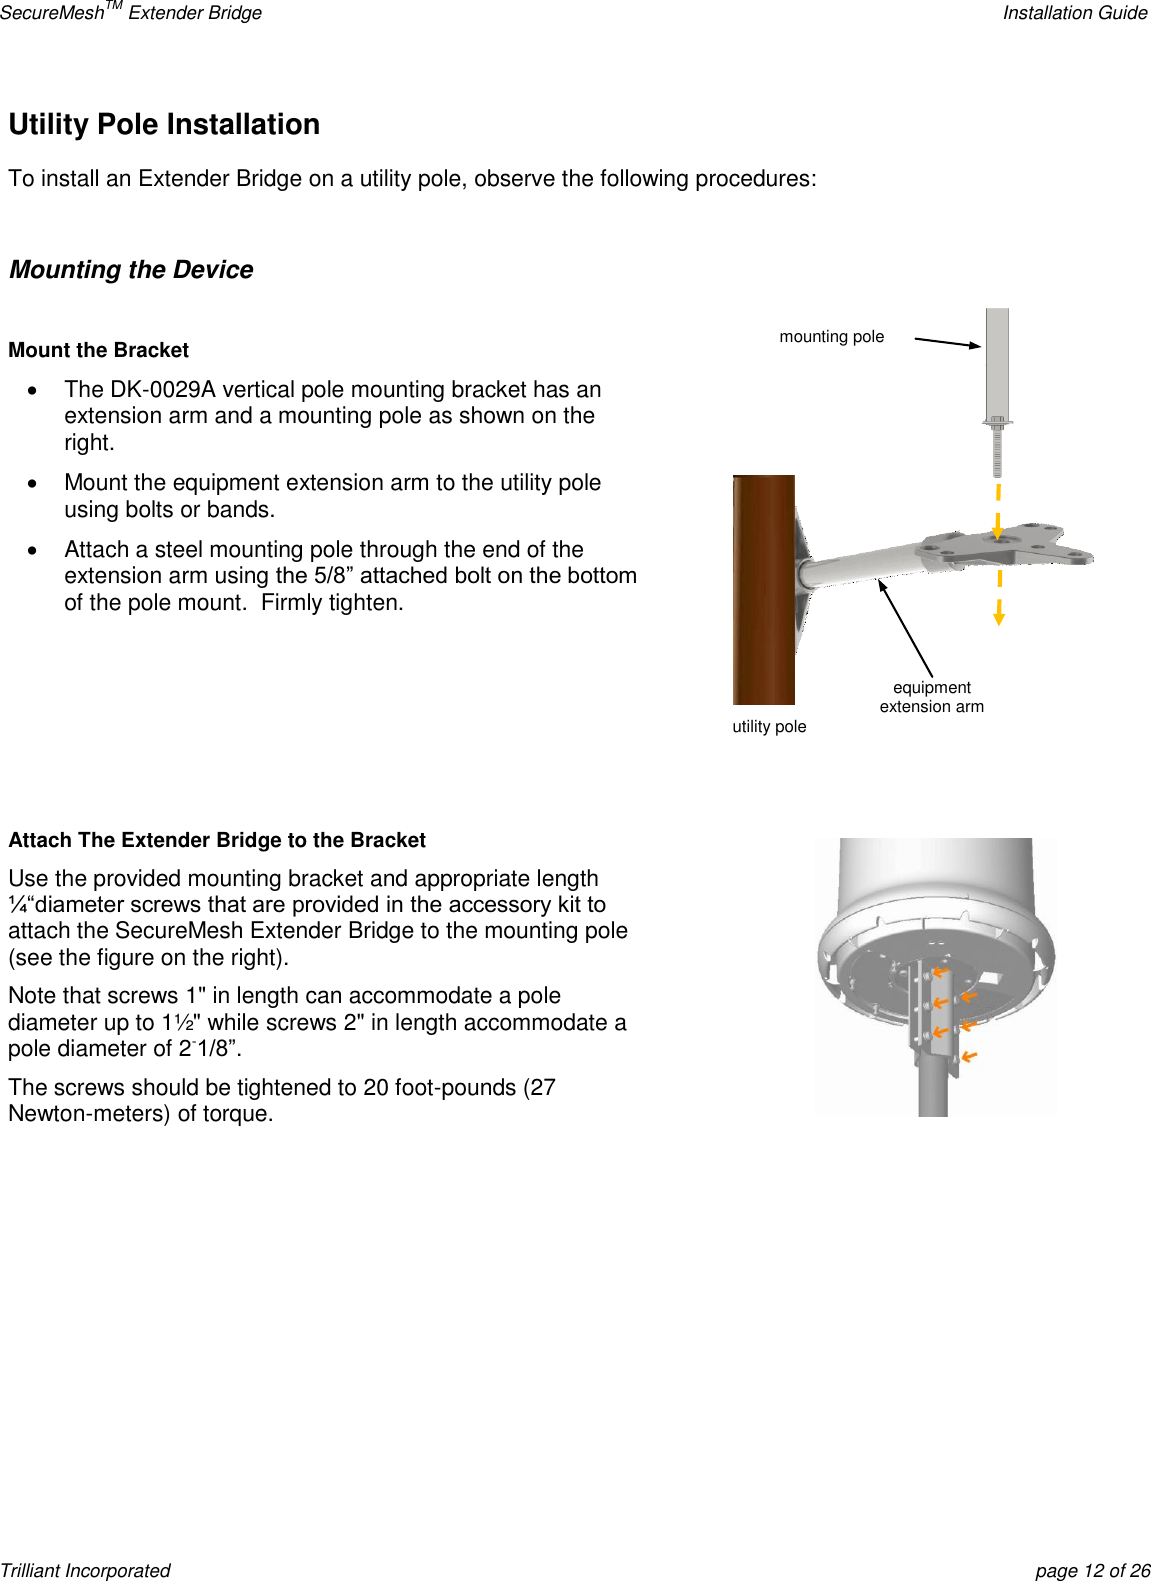 SecureMeshTM Extender Bridge    Installation Guide Trilliant Incorporated  page 12 of 26 Utility Pole Installation  To install an Extender Bridge on a utility pole, observe the following procedures:  Mounting the Device  Mount the Bracket   The DK-0029A vertical pole mounting bracket has an extension arm and a mounting pole as shown on the right.    Mount the equipment extension arm to the utility pole using bolts or bands.   Attach a steel mounting pole through the end of the extension arm using the 5/8‖ attached bolt on the bottom of the pole mount.  Firmly tighten.     Attach The Extender Bridge to the Bracket Use the provided mounting bracket and appropriate length ¼―diameter screws that are provided in the accessory kit to attach the SecureMesh Extender Bridge to the mounting pole (see the figure on the right).   Note that screws 1&quot; in length can accommodate a pole diameter up to 1½&quot; while screws 2&quot; in length accommodate a pole diameter of 2-1/8‖. The screws should be tightened to 20 foot-pounds (27 Newton-meters) of torque.      equipment  extension arm utility pole mounting pole 